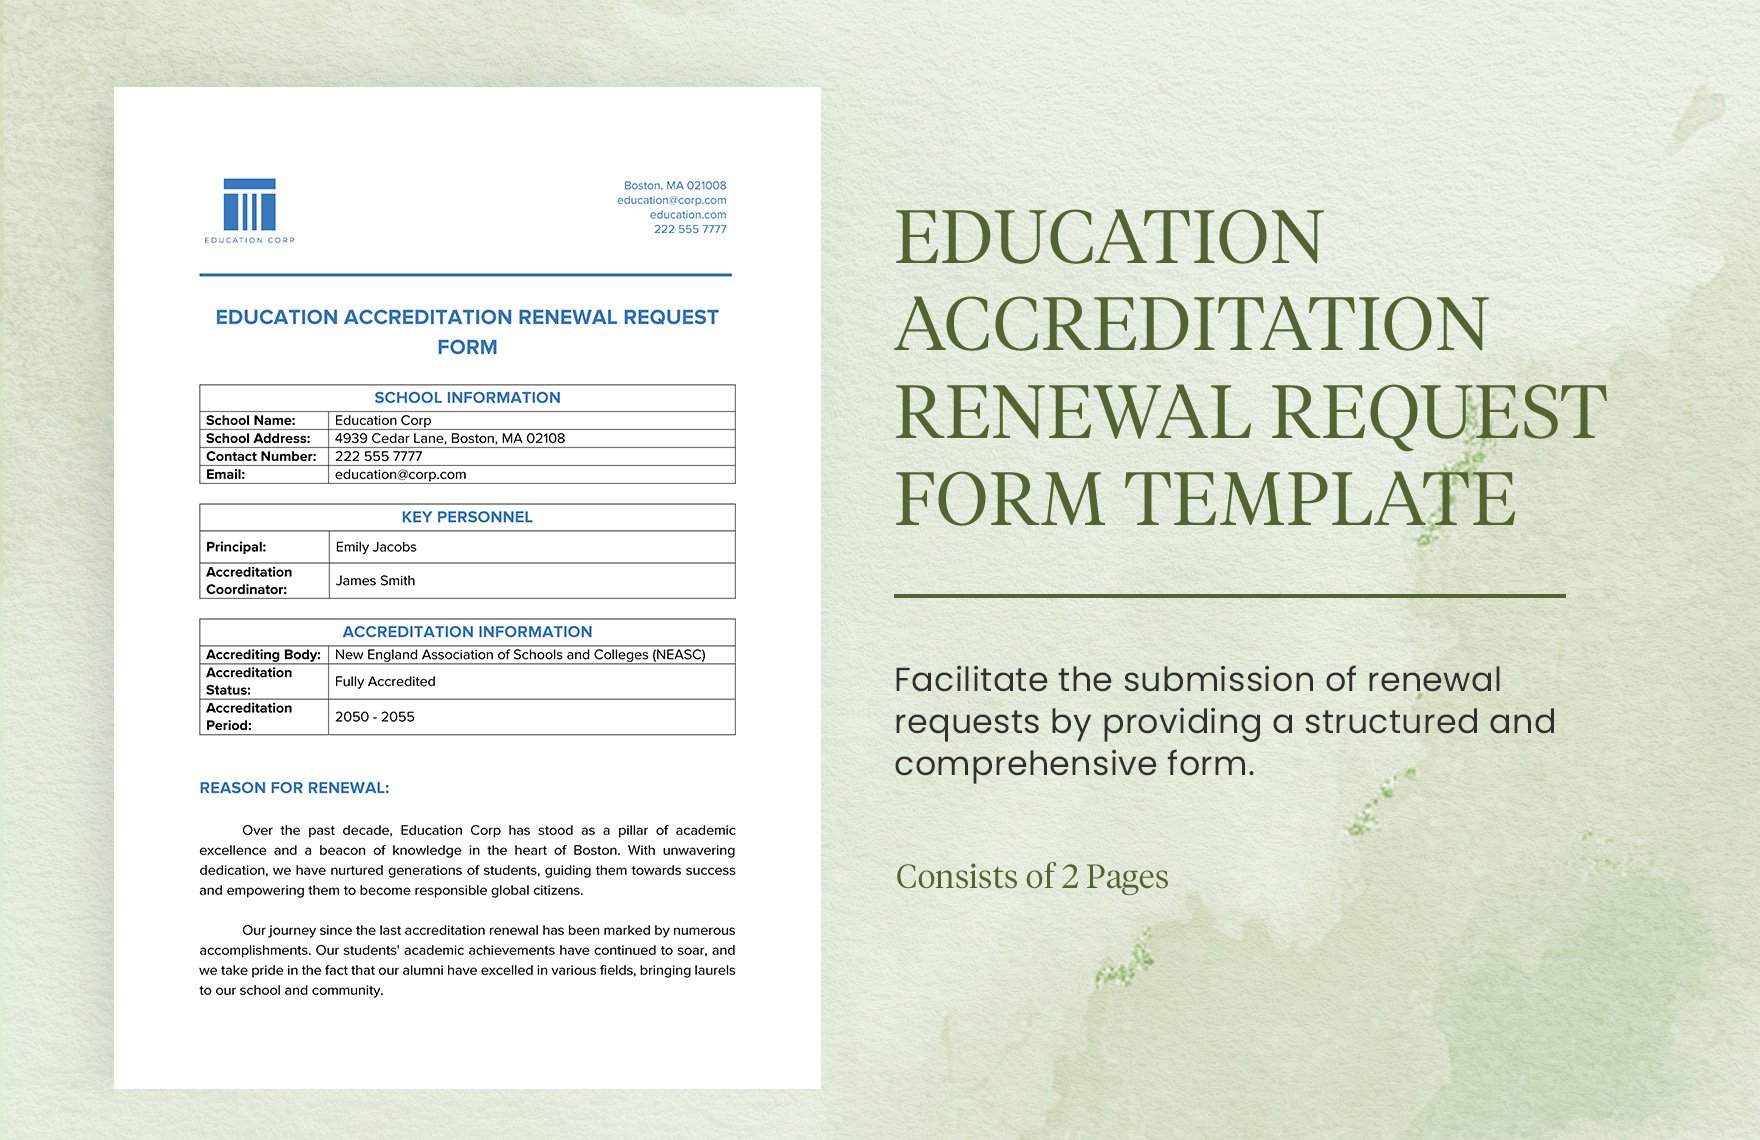 Education Accreditation Renewal Request Form Template